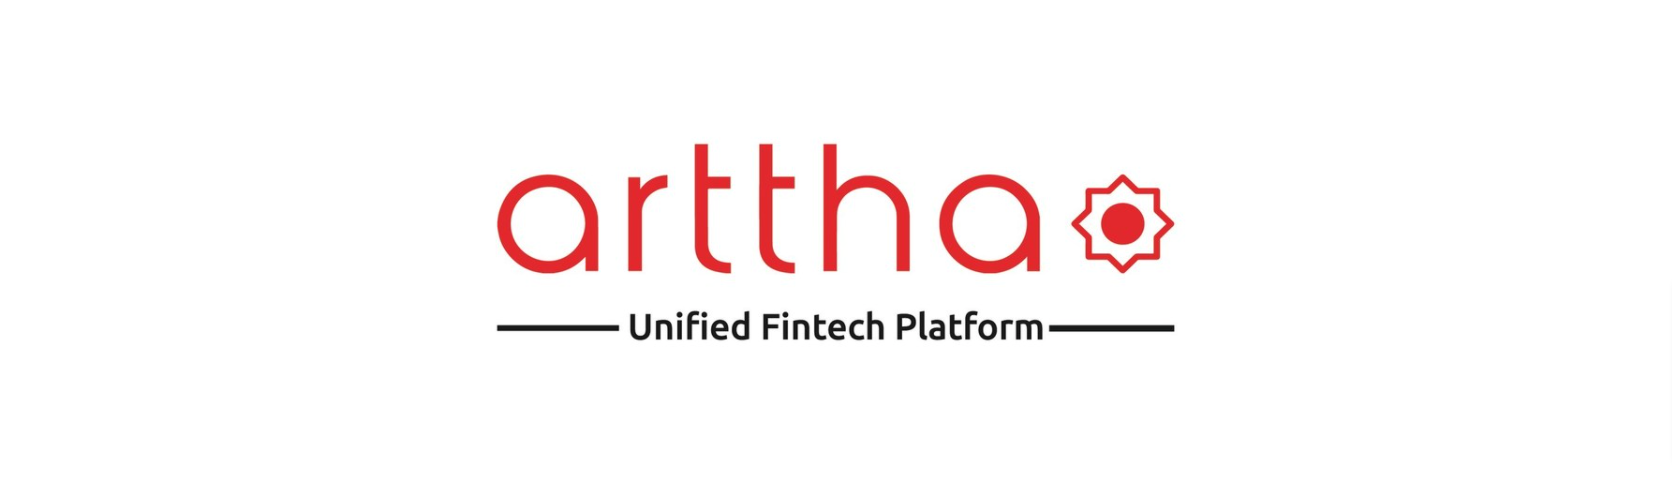 Arttha Payments selected to modernize the core system for Indonesia s LinkAja eWallet Service